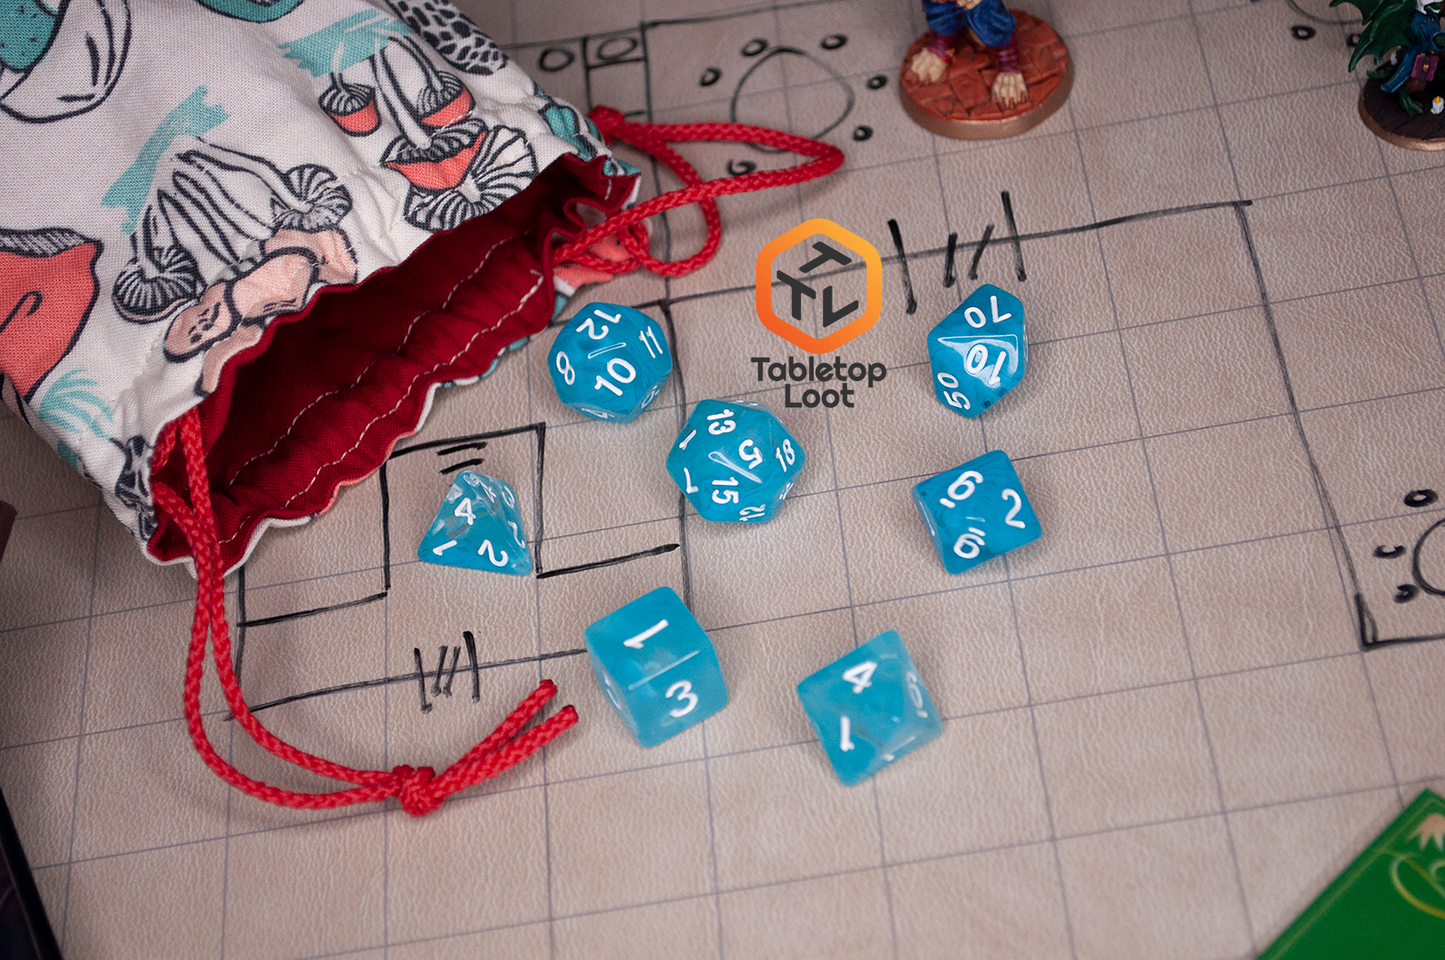 The Sky Blue 7 piece dice set from Tabletop Loot with blue and white swirls in clear resin and white numbering.